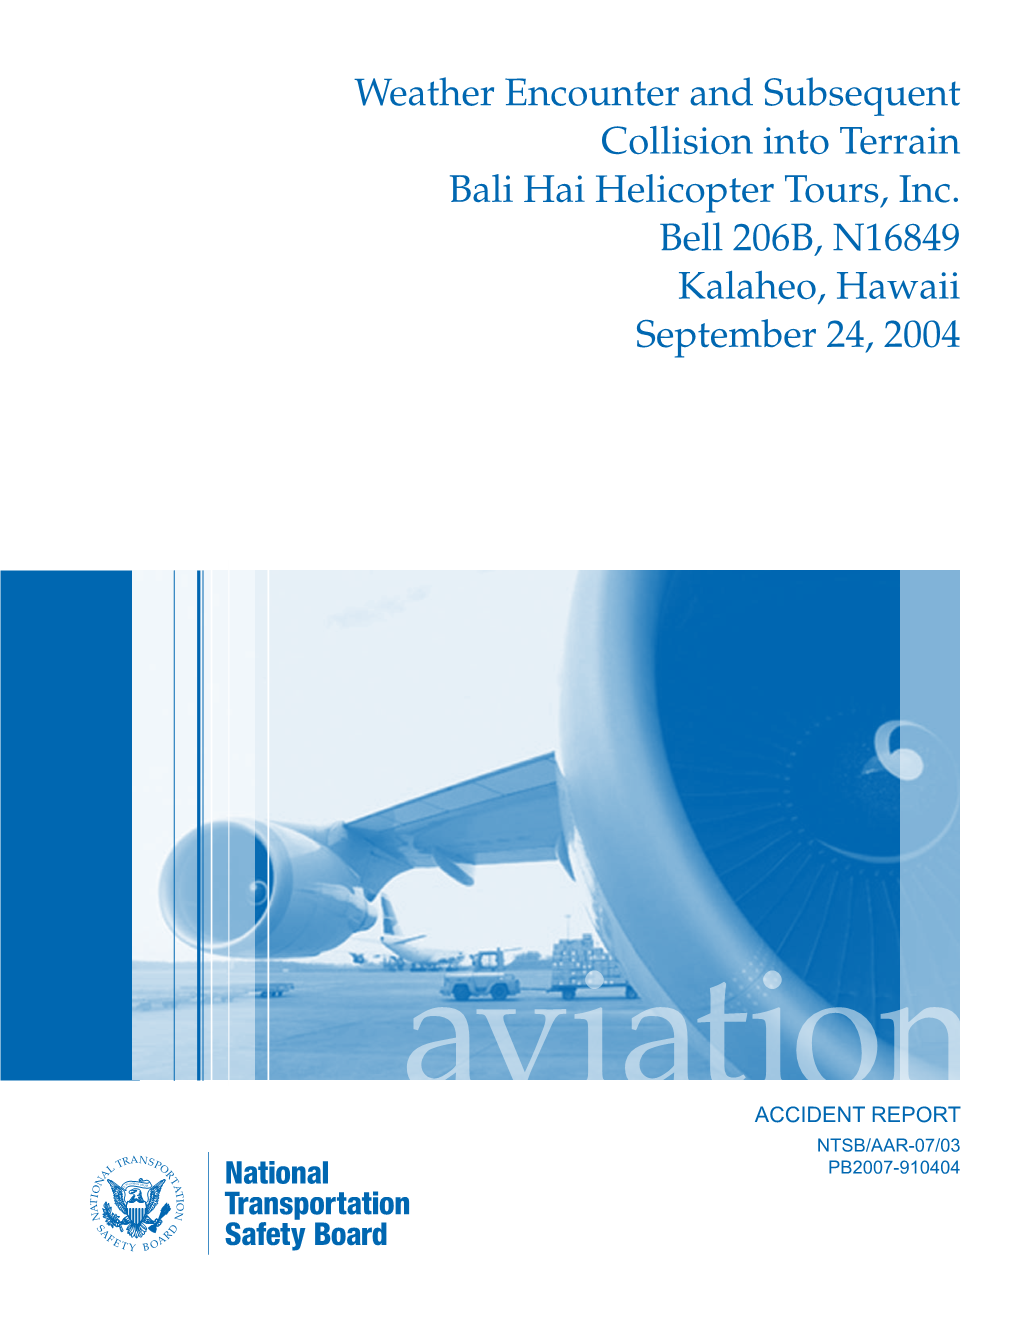 Weather Encounter and Subsequent Collision Into Terrain Bali Hai Helicopter Tours, Inc